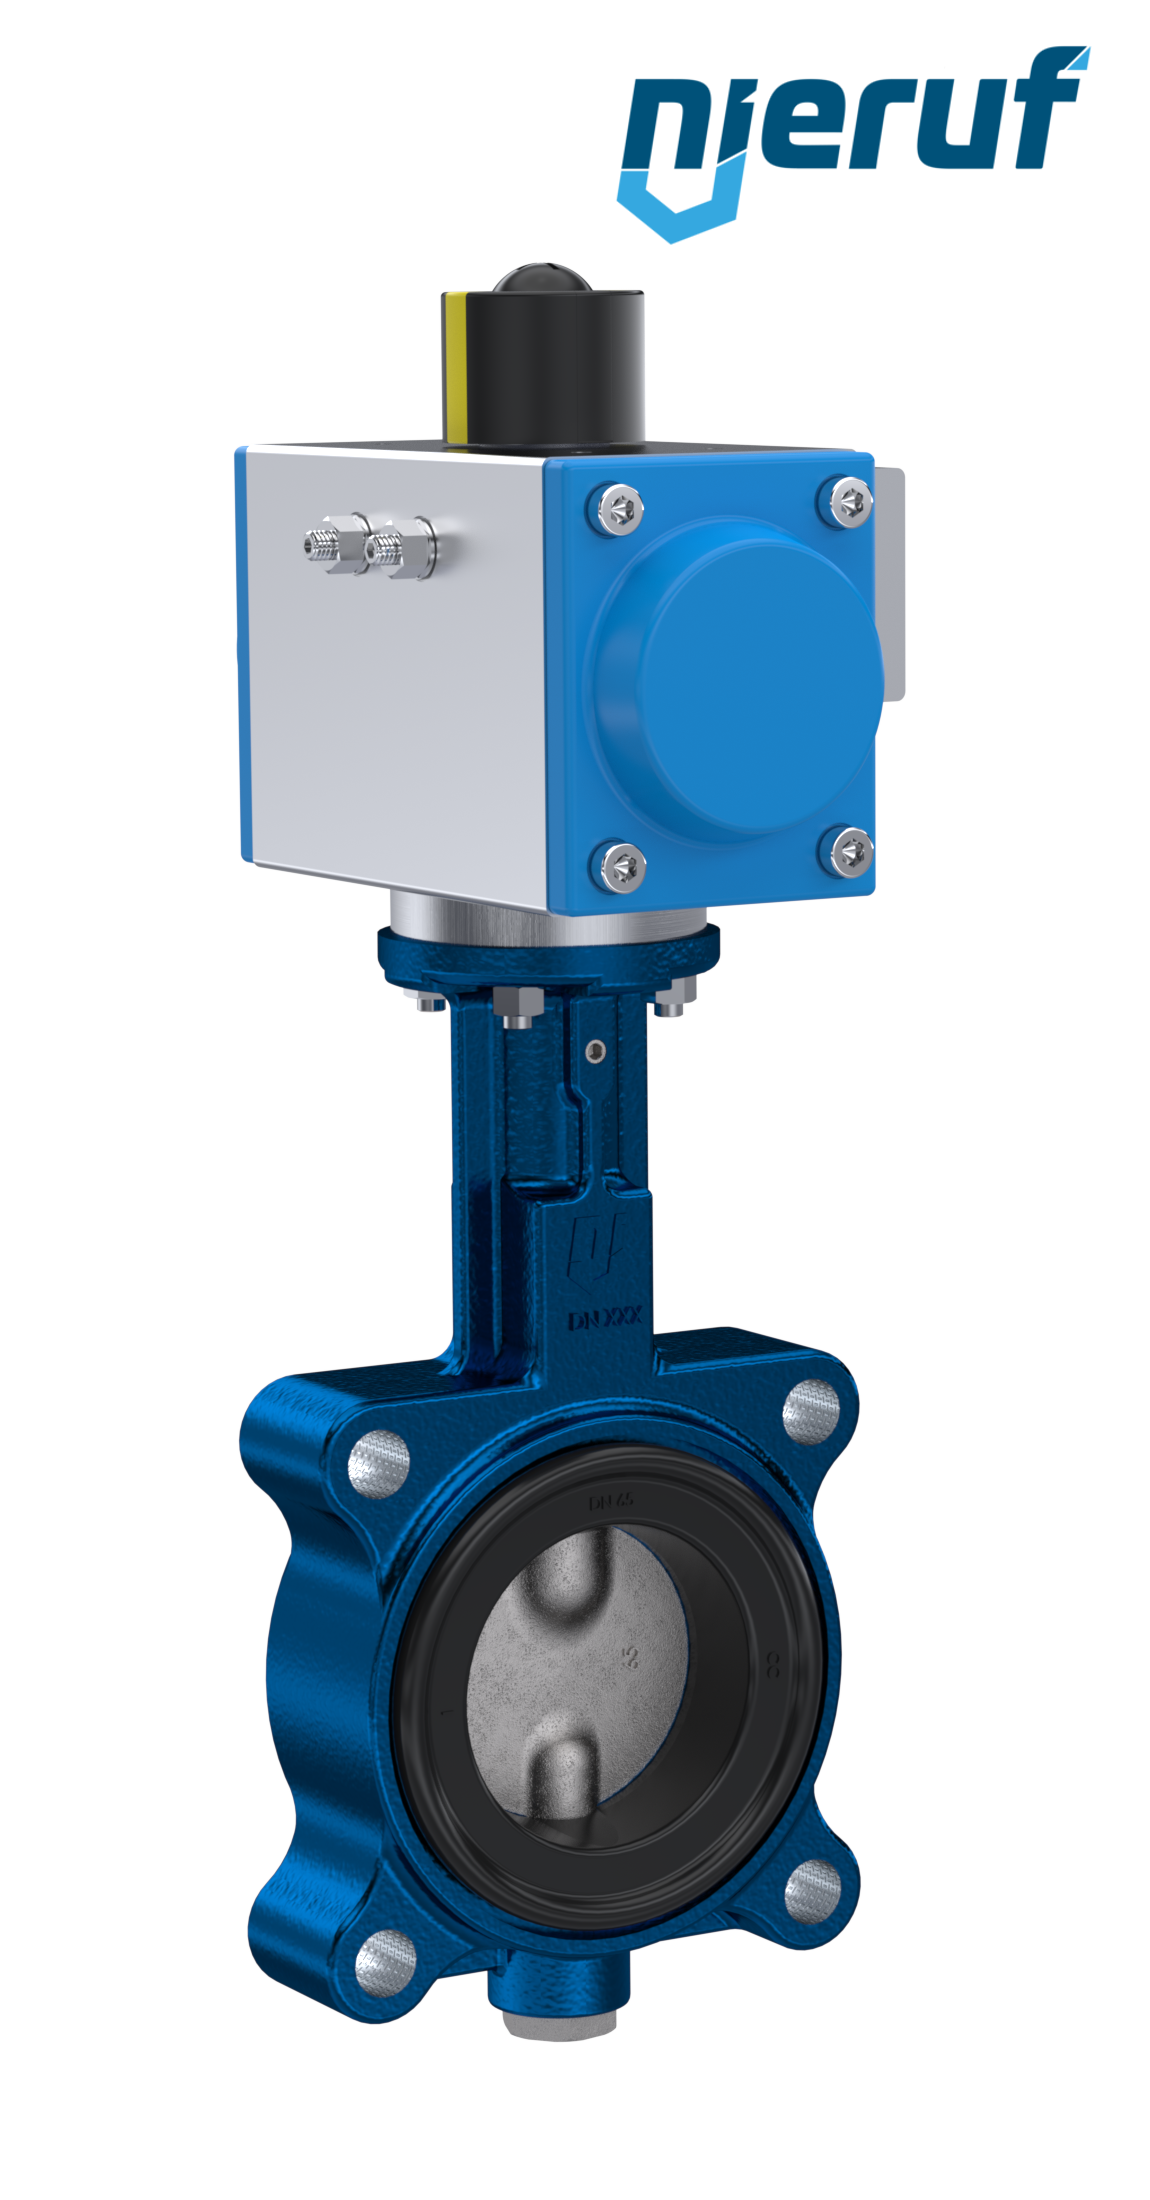 Butterfly valve DN 50 AK02 EPDM DVGW drinking water, WRAS, ACS, W270 pneumatic actuator double acting